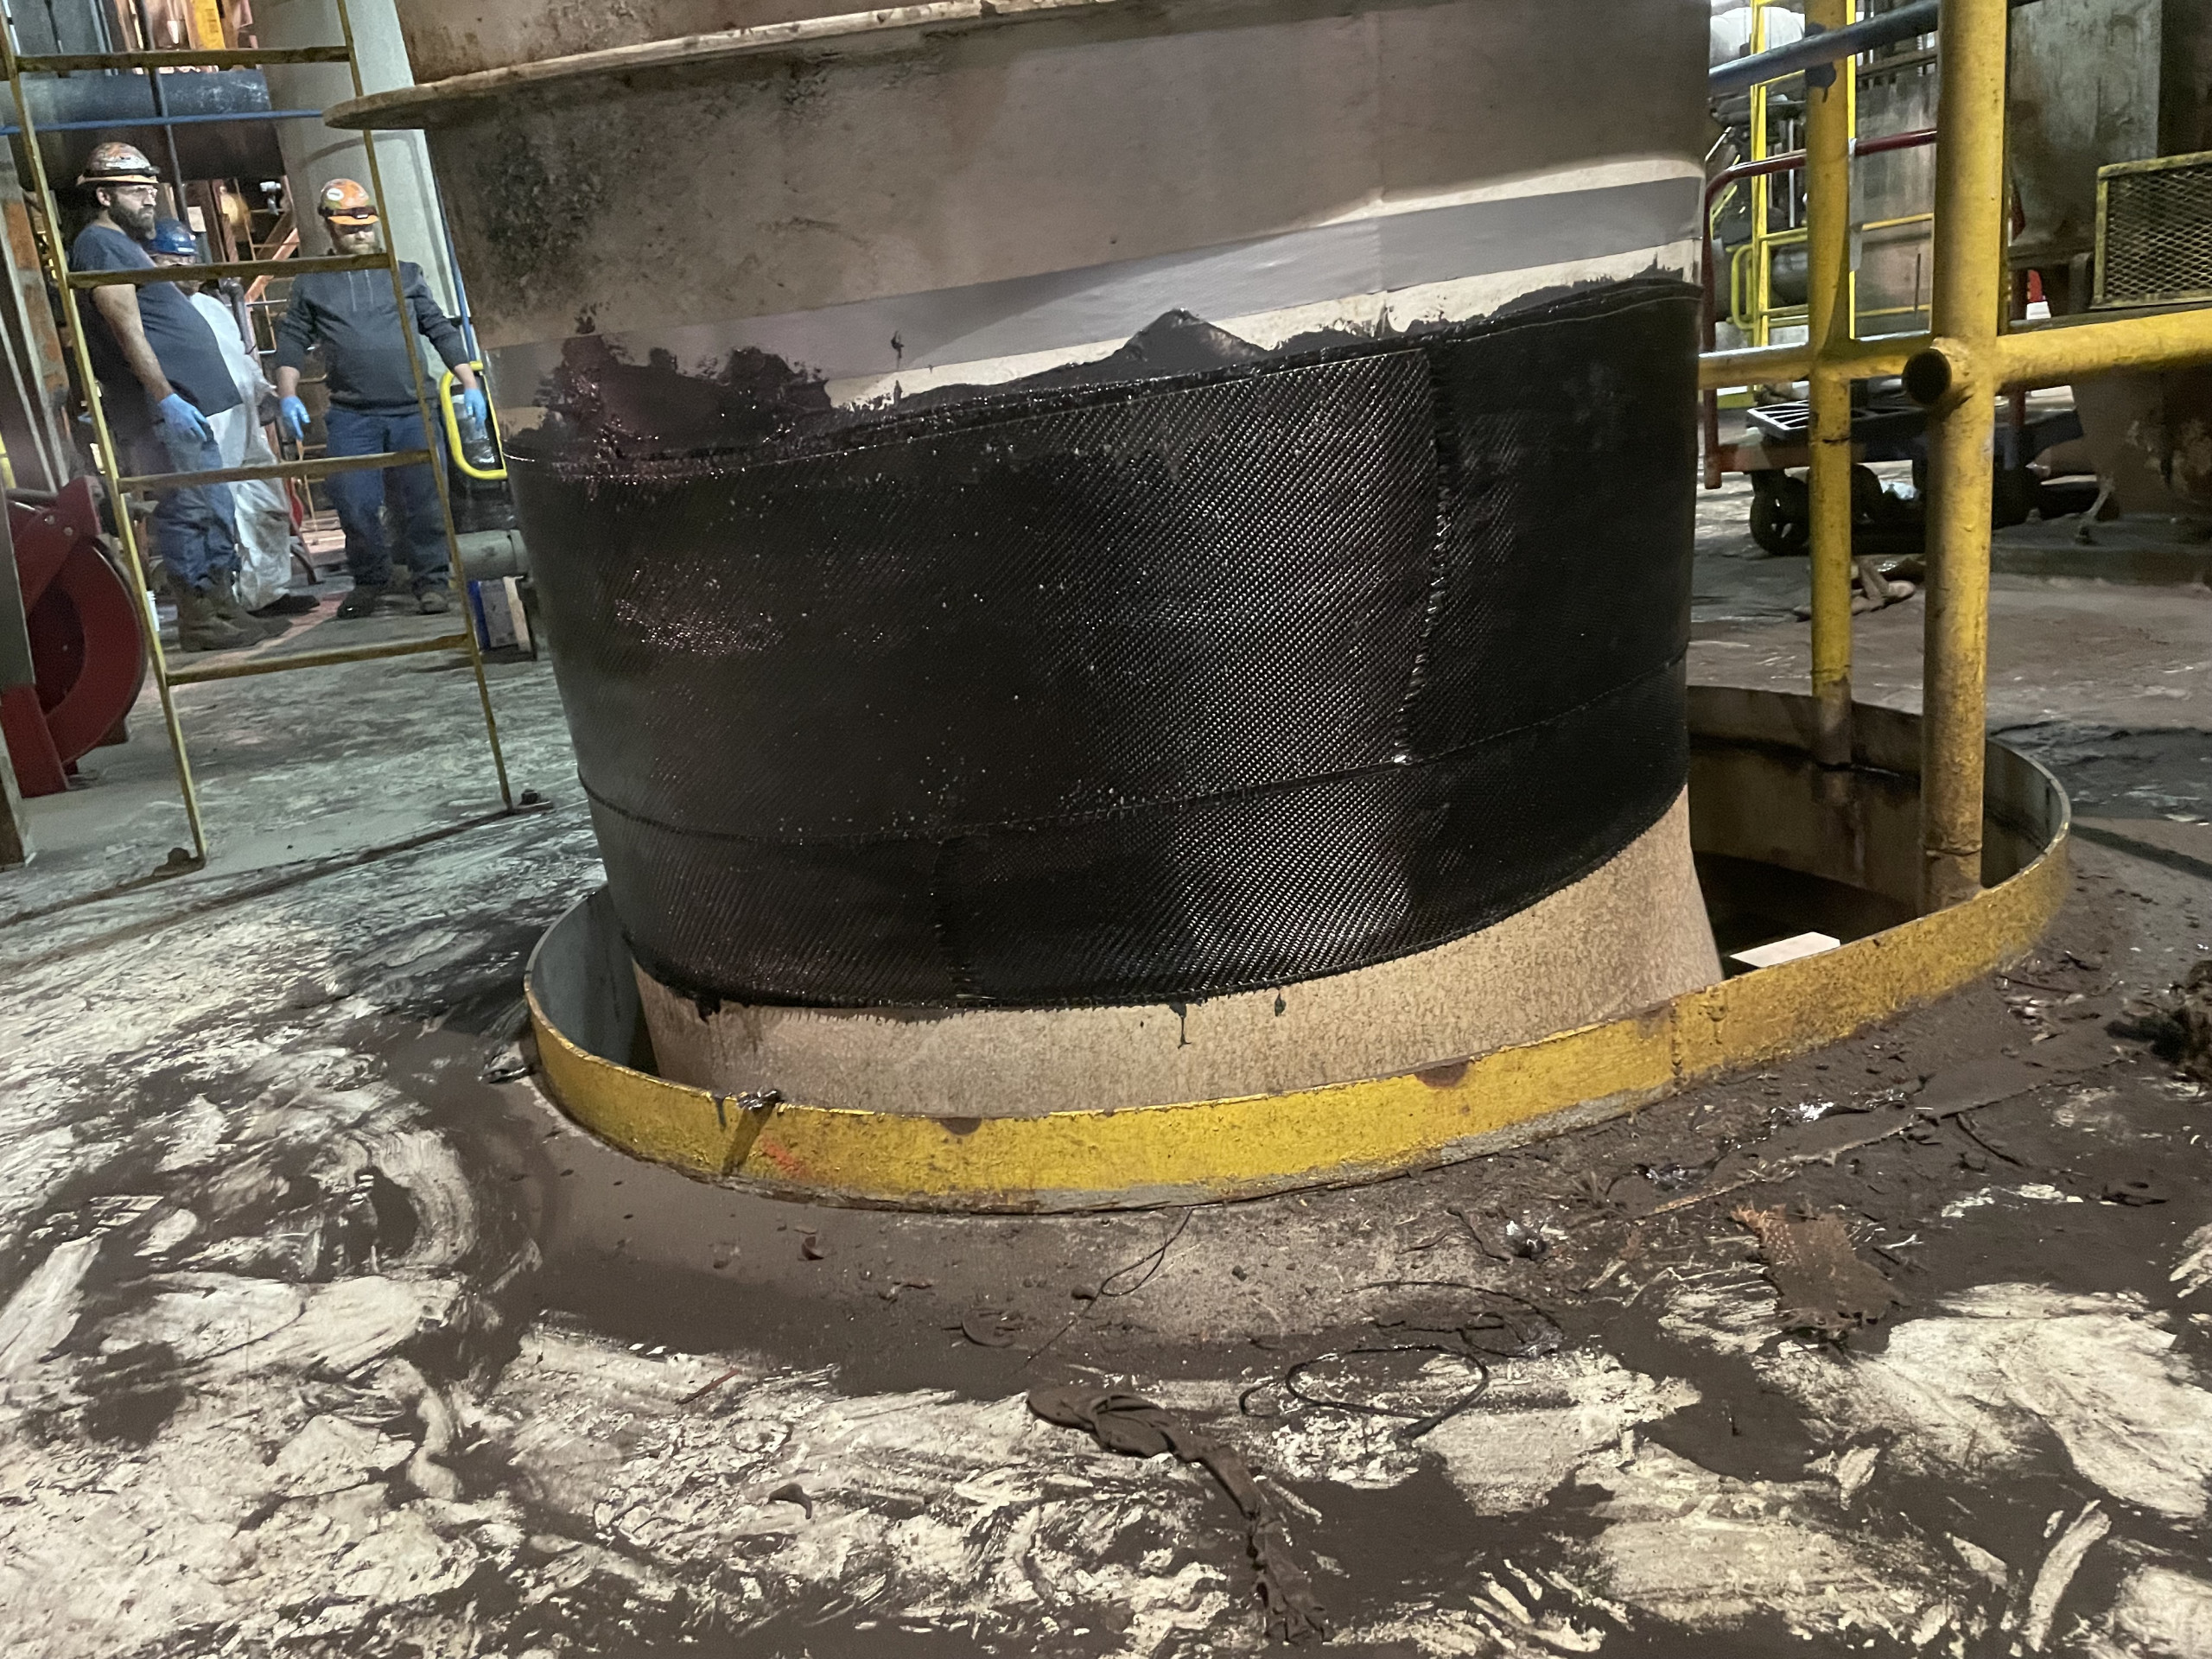 Composite wrap on a large pipe in a coal-fired power plant.